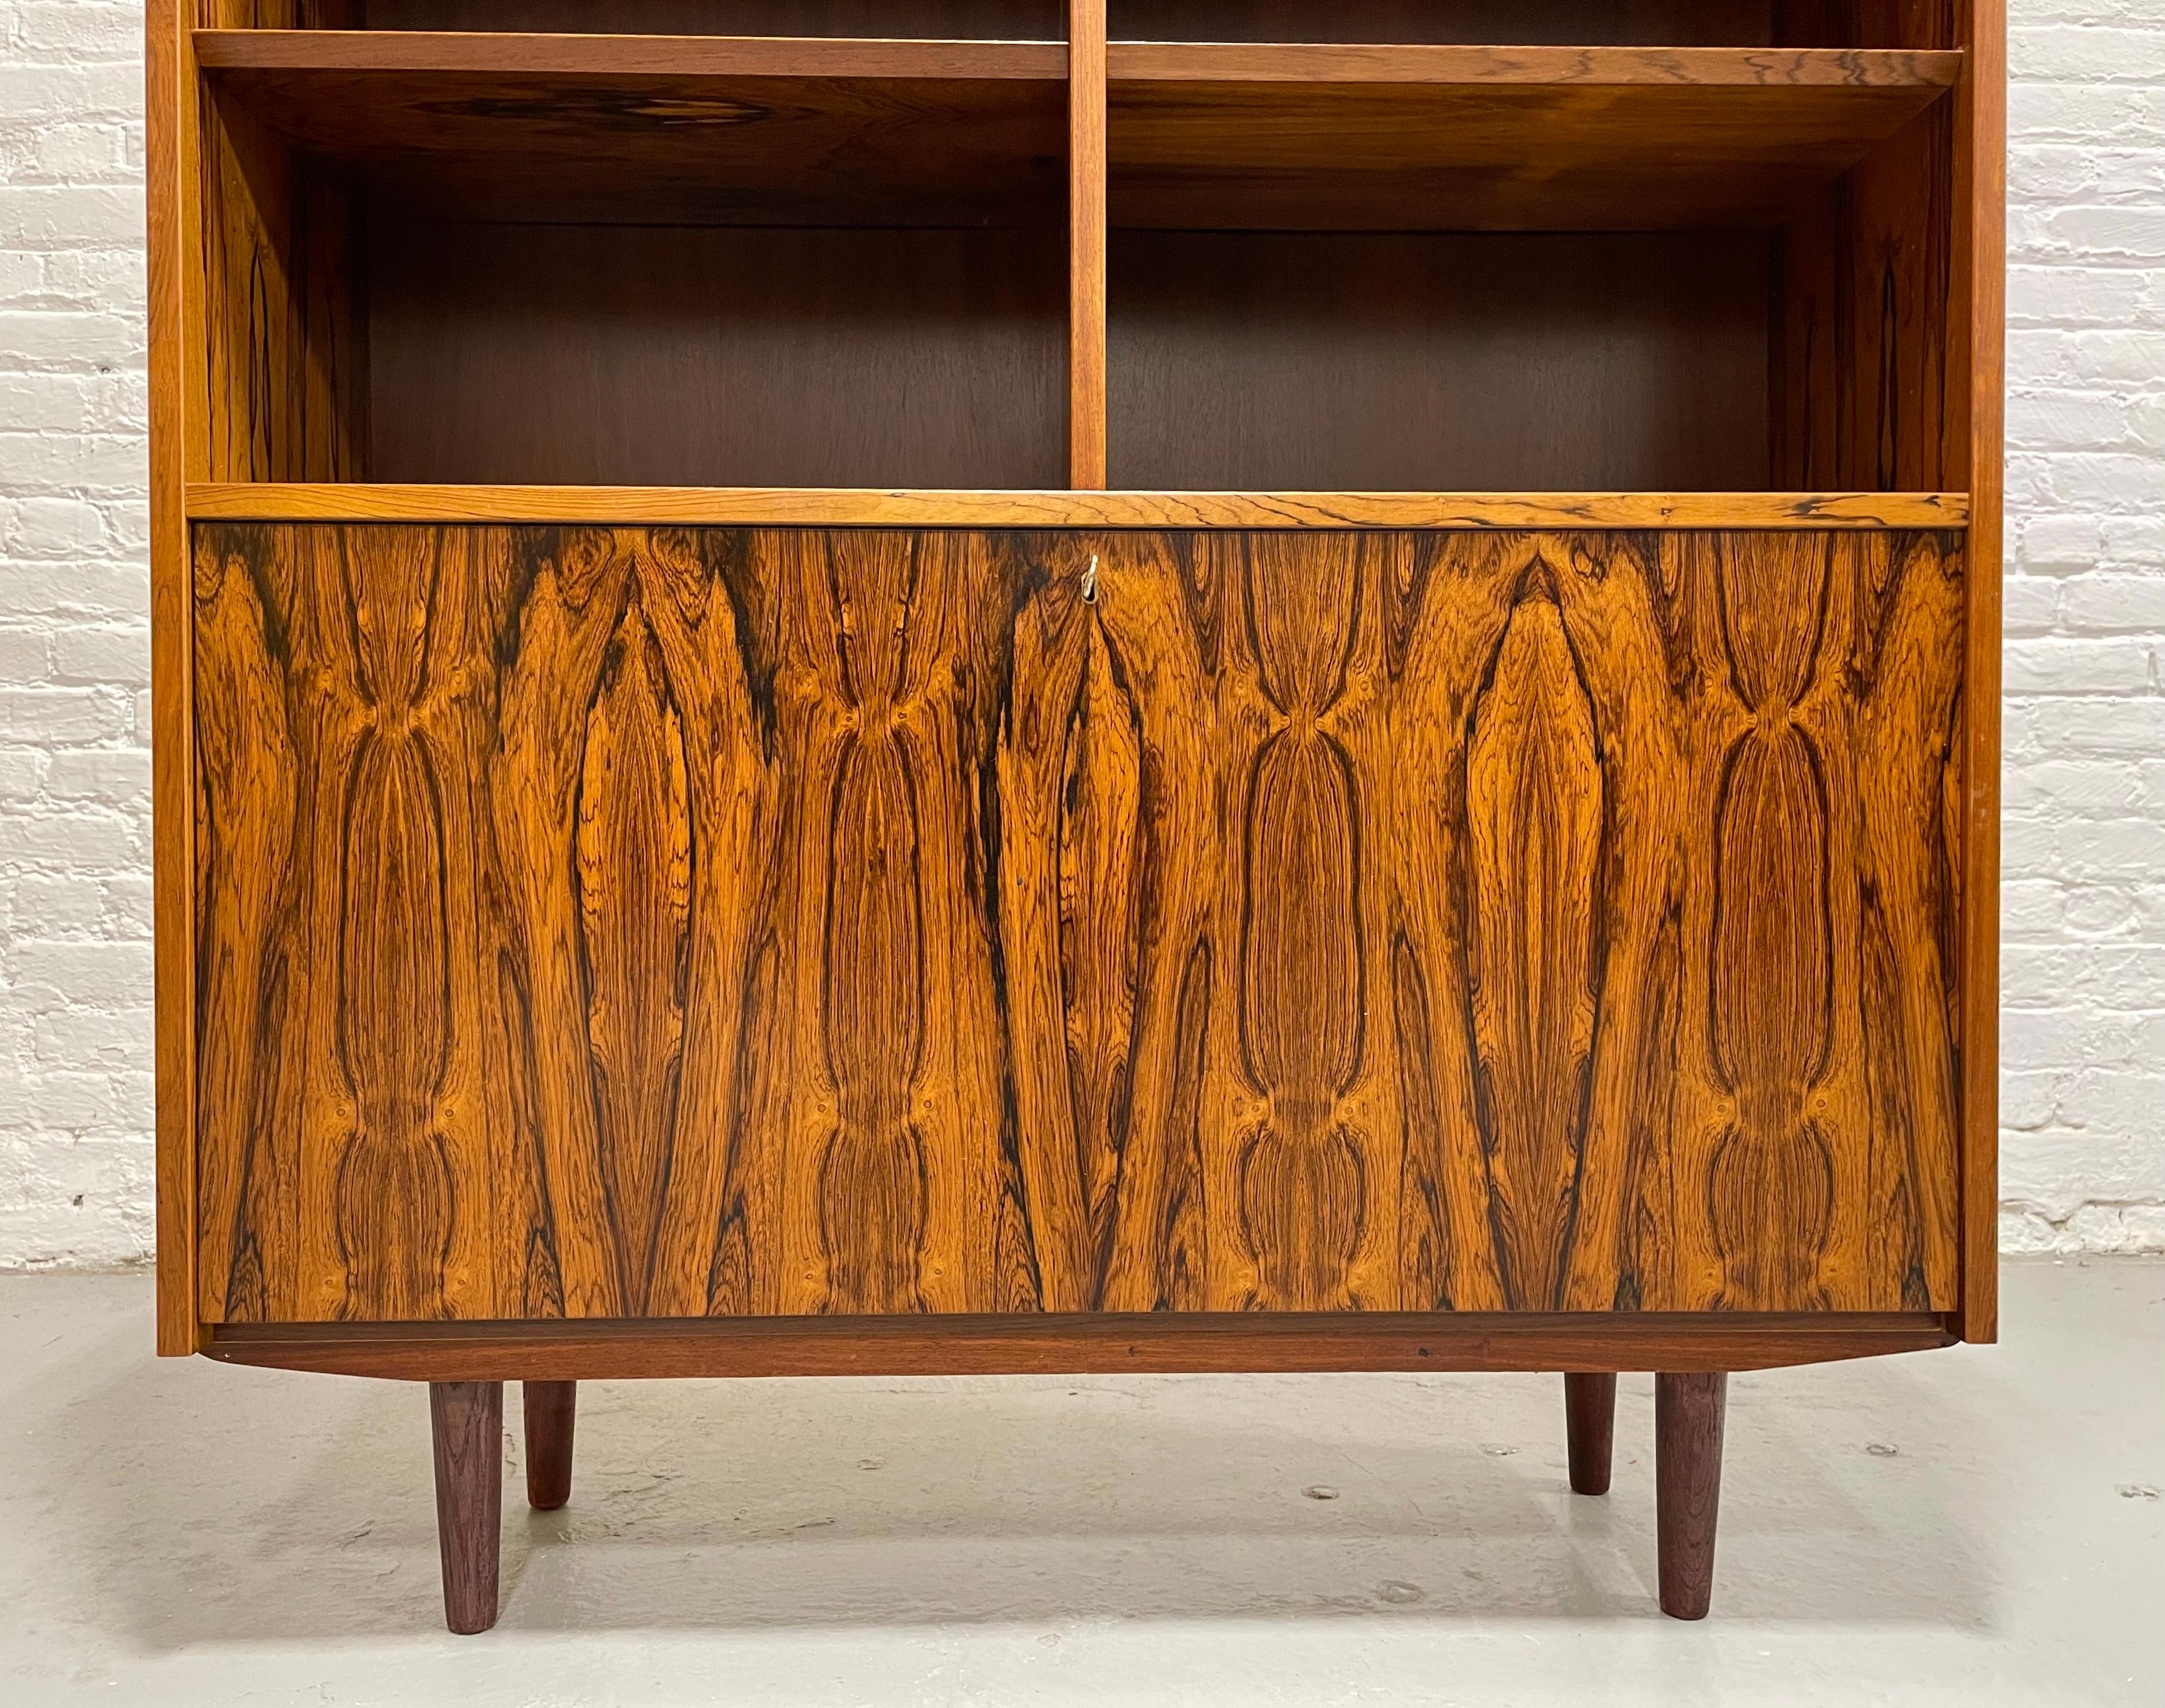 DANISH Mid Century Modern ROSEWOOD BOOKCASE / China Cabinet, c. 1960's For Sale 1